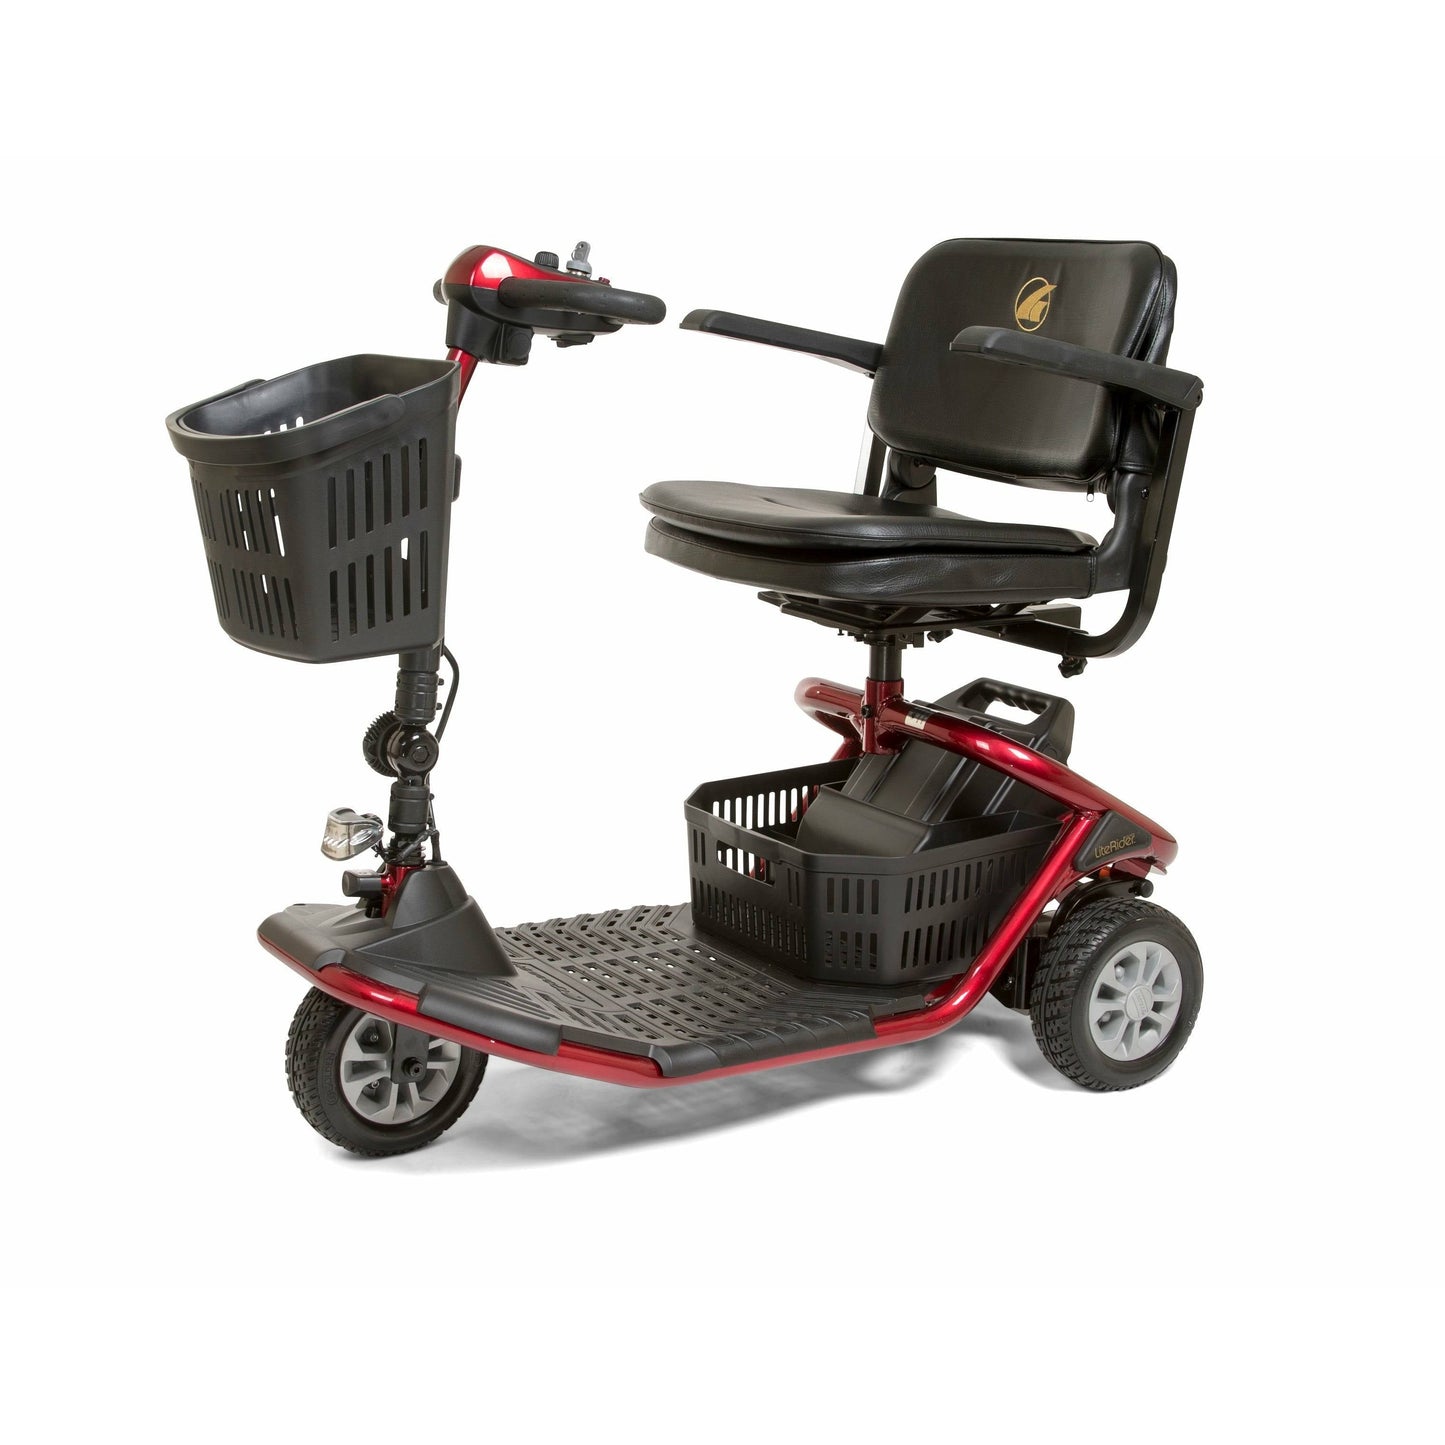 Products Golden Technologies LiteRider 3-Wheel Travel Mobility Scooter in Red